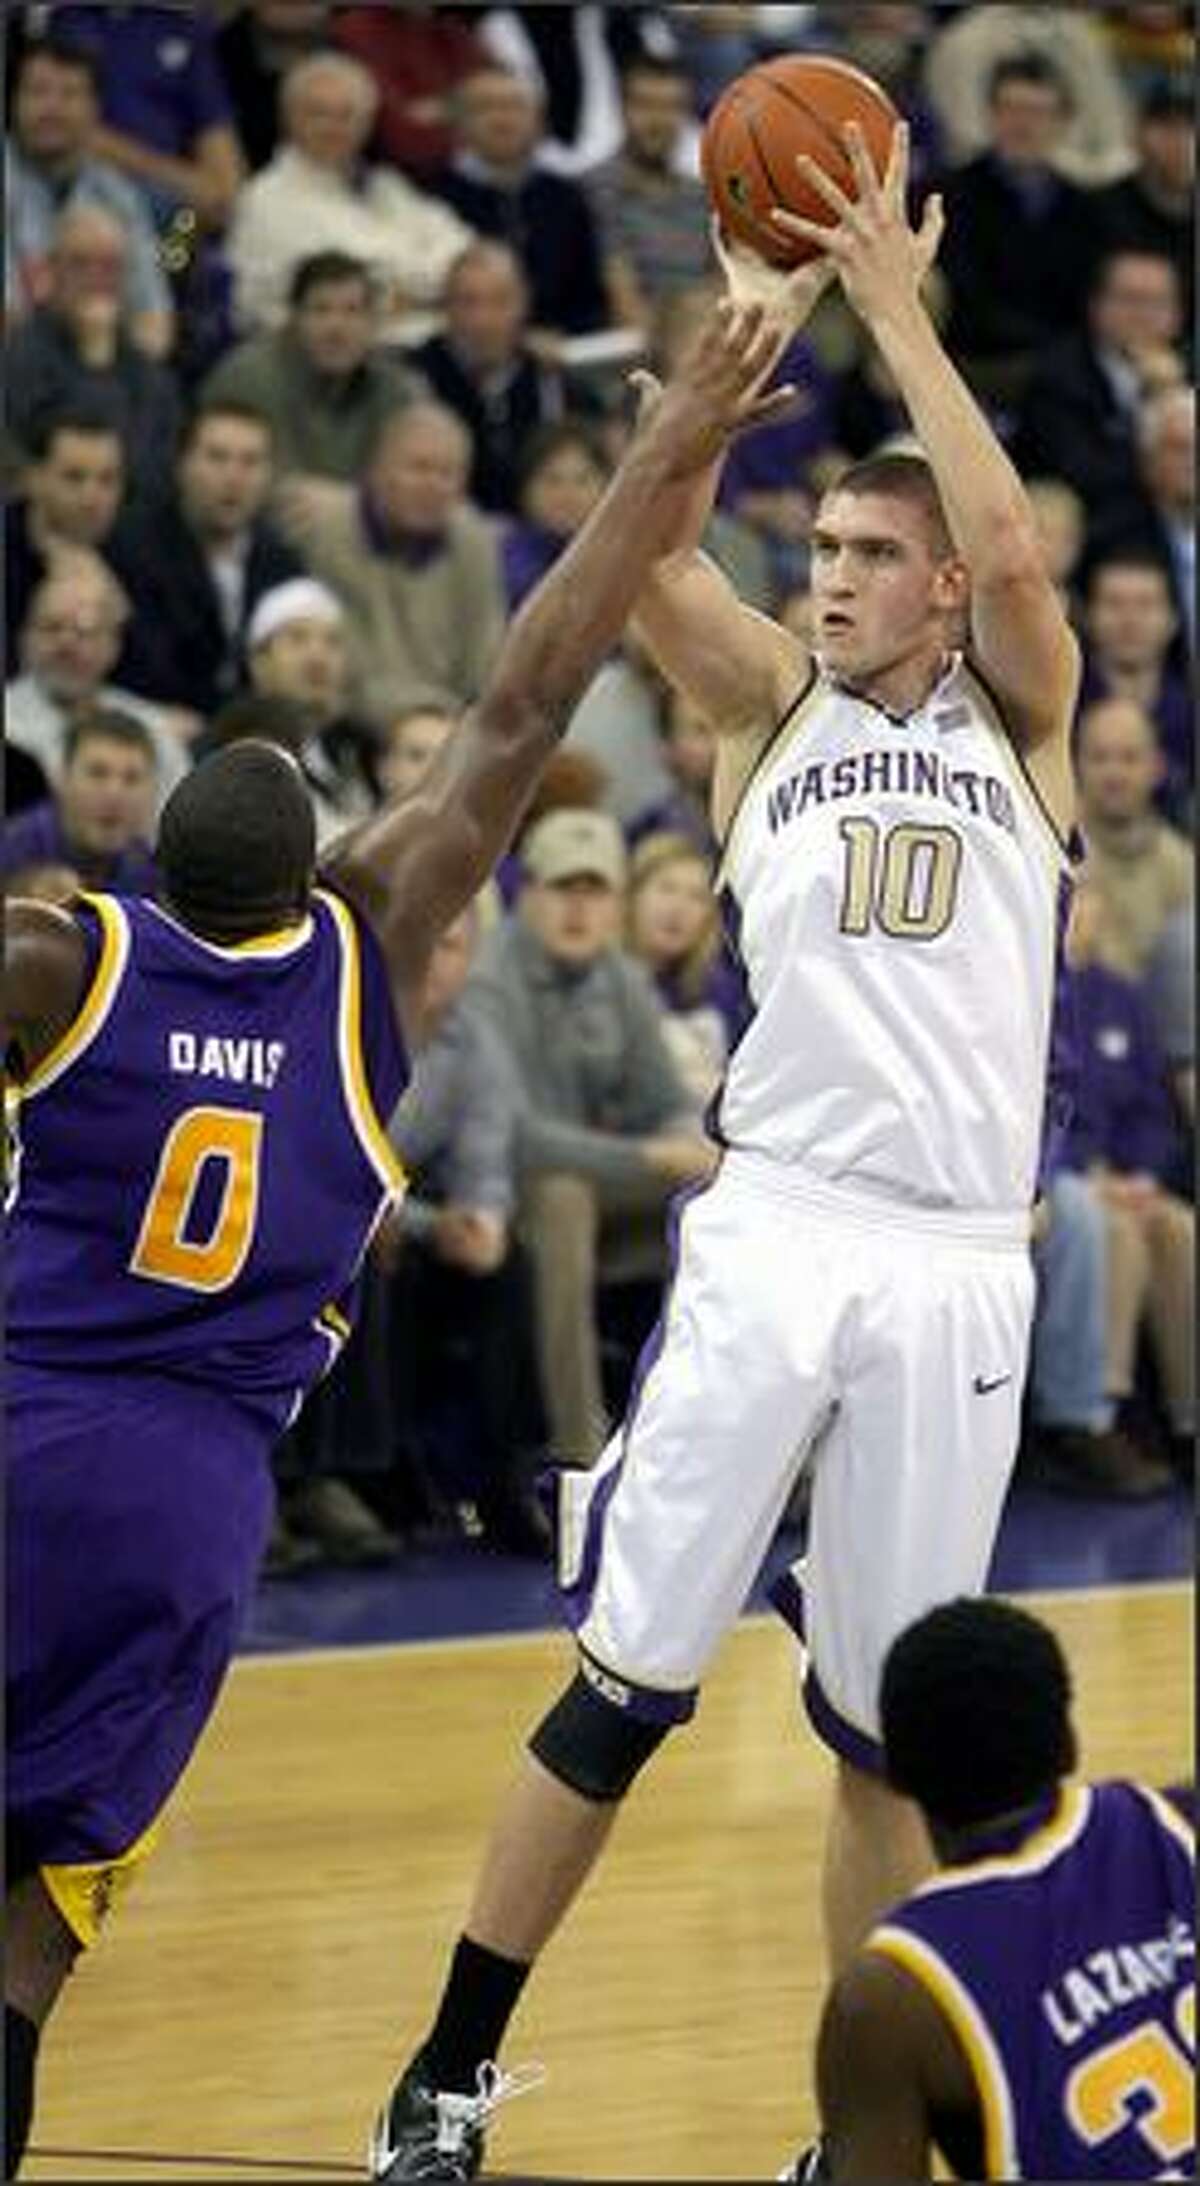 Washington's Spencer Hawes shoots and scores over LSU's Glen Davis during the first half of Wednesday's game. Hawes scored 23 points as the Huskies pulled a 88-72 upset.